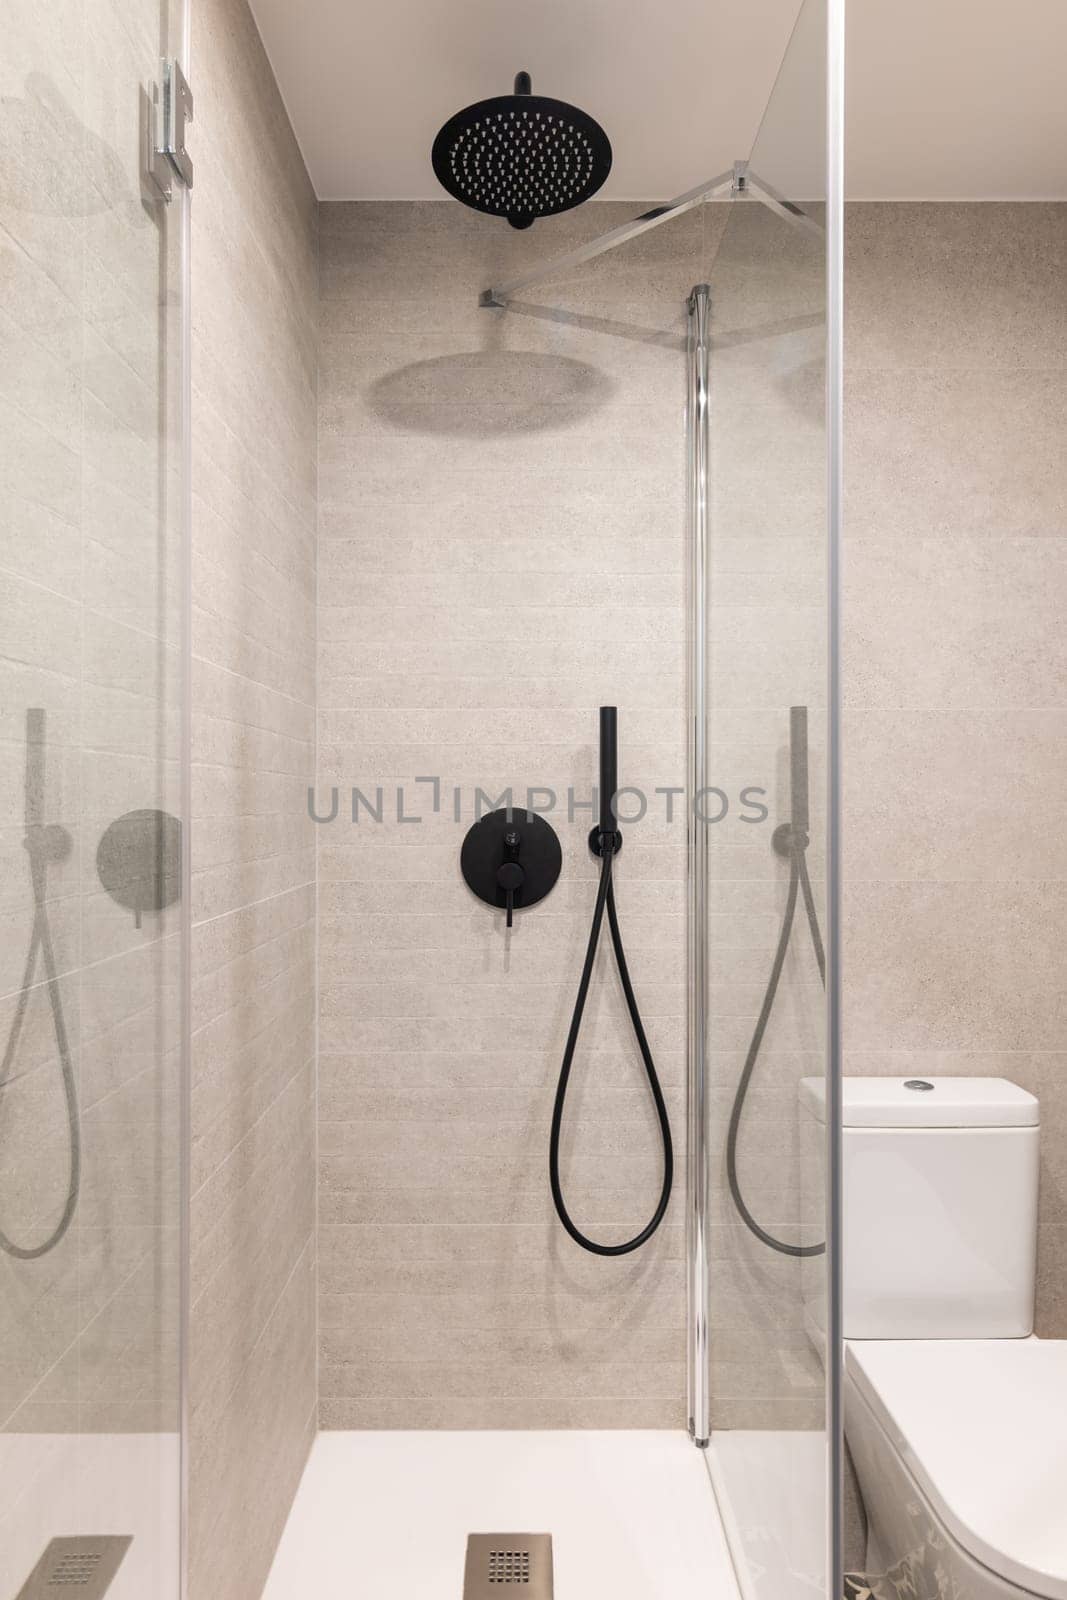 Glass shower unit and toilet bowl in stylish tiled bathroom. Equipment for personal hygiene in modern hotel room. Home interior design